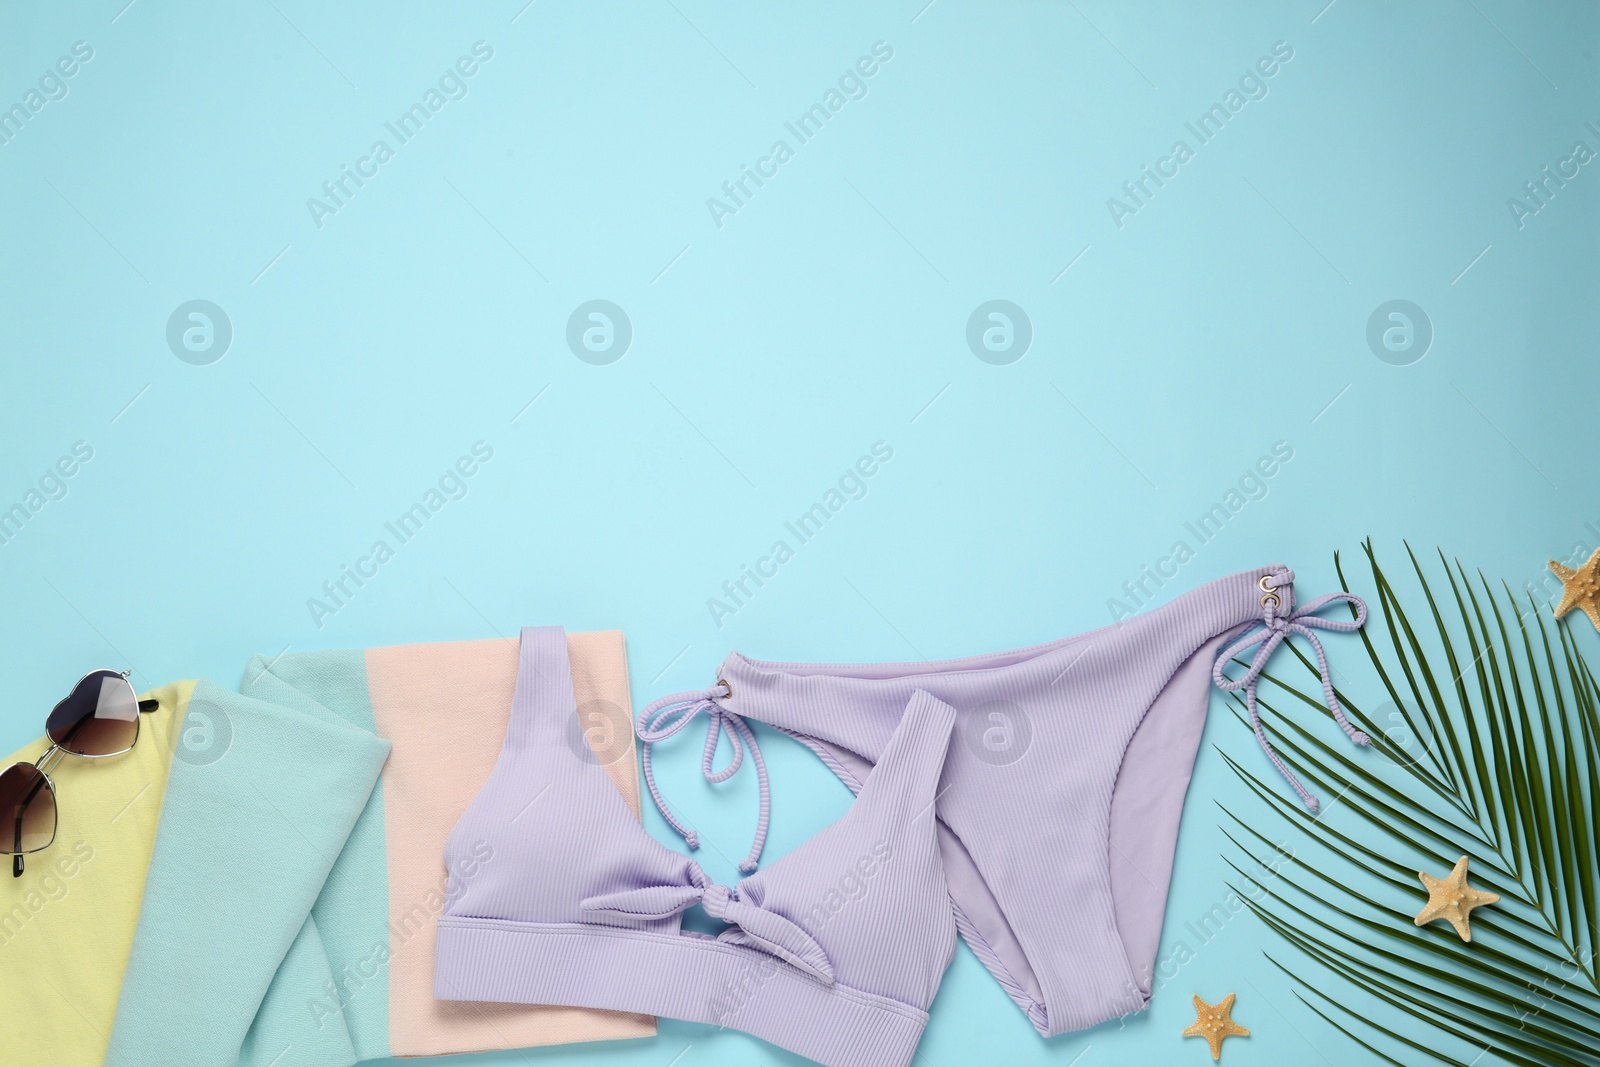 Photo of Beach towel, swimsuit and sunglasses on light blue background, flat lay. Space for text